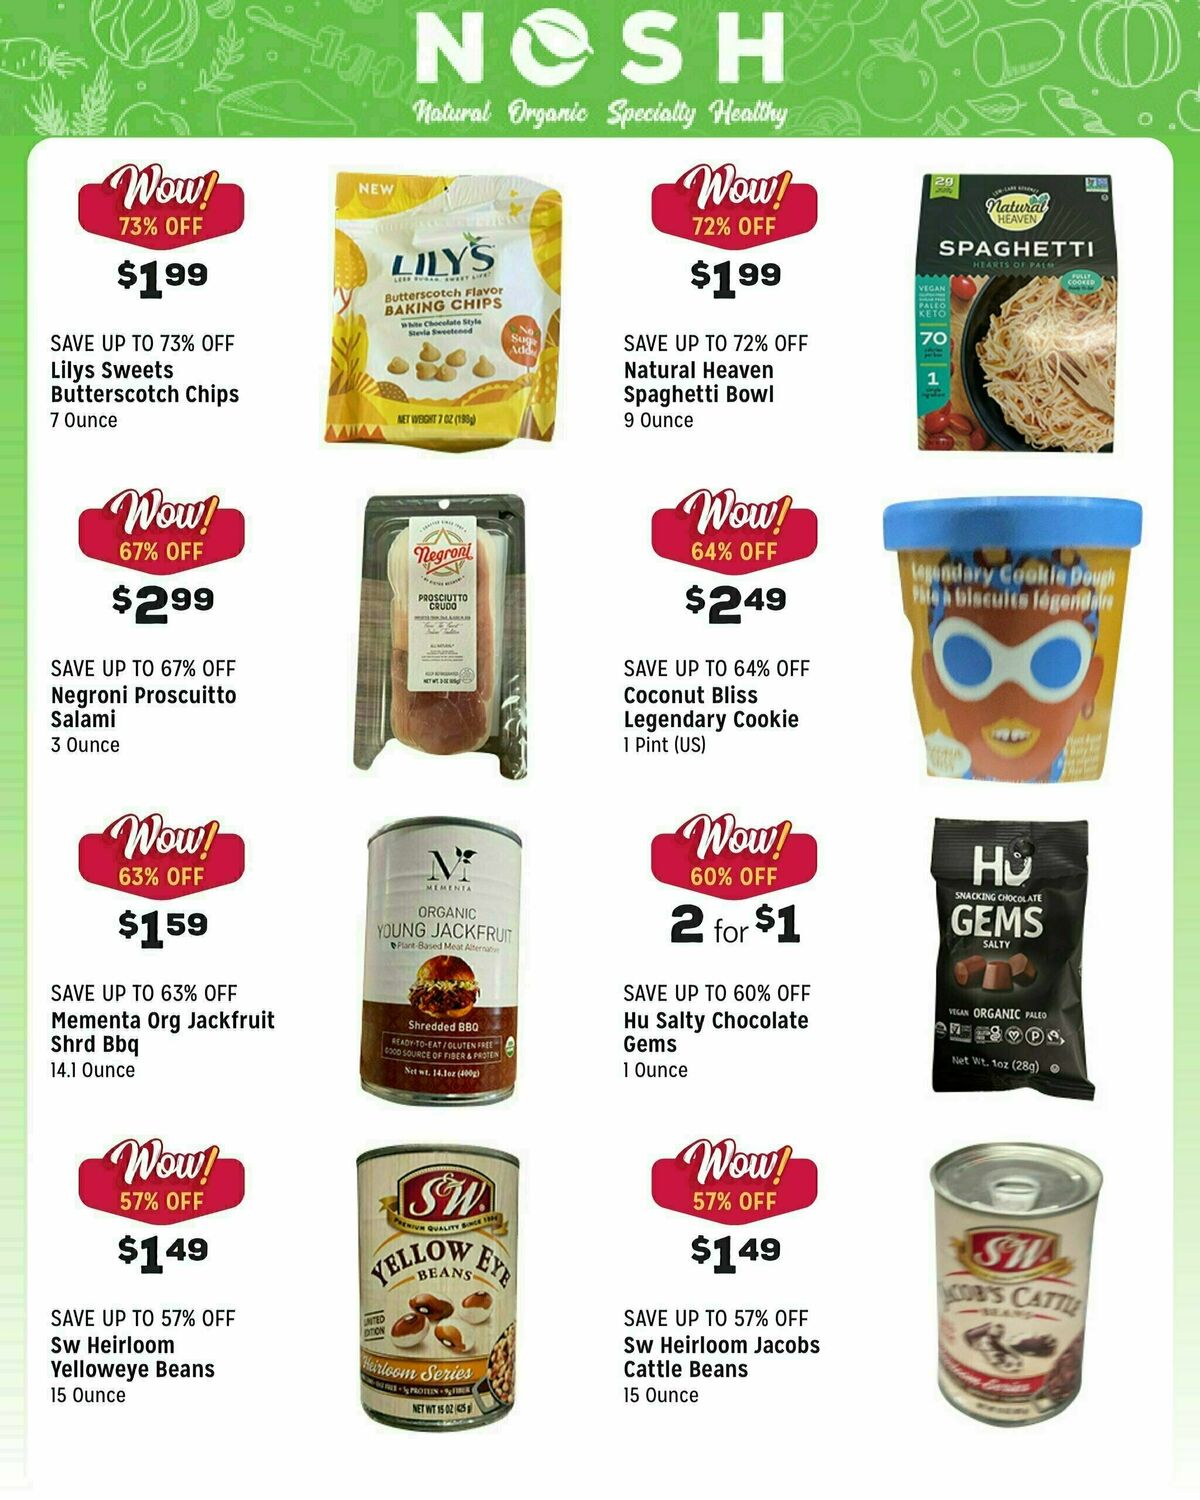 Grocery Outlet Weekly Ad from November 8